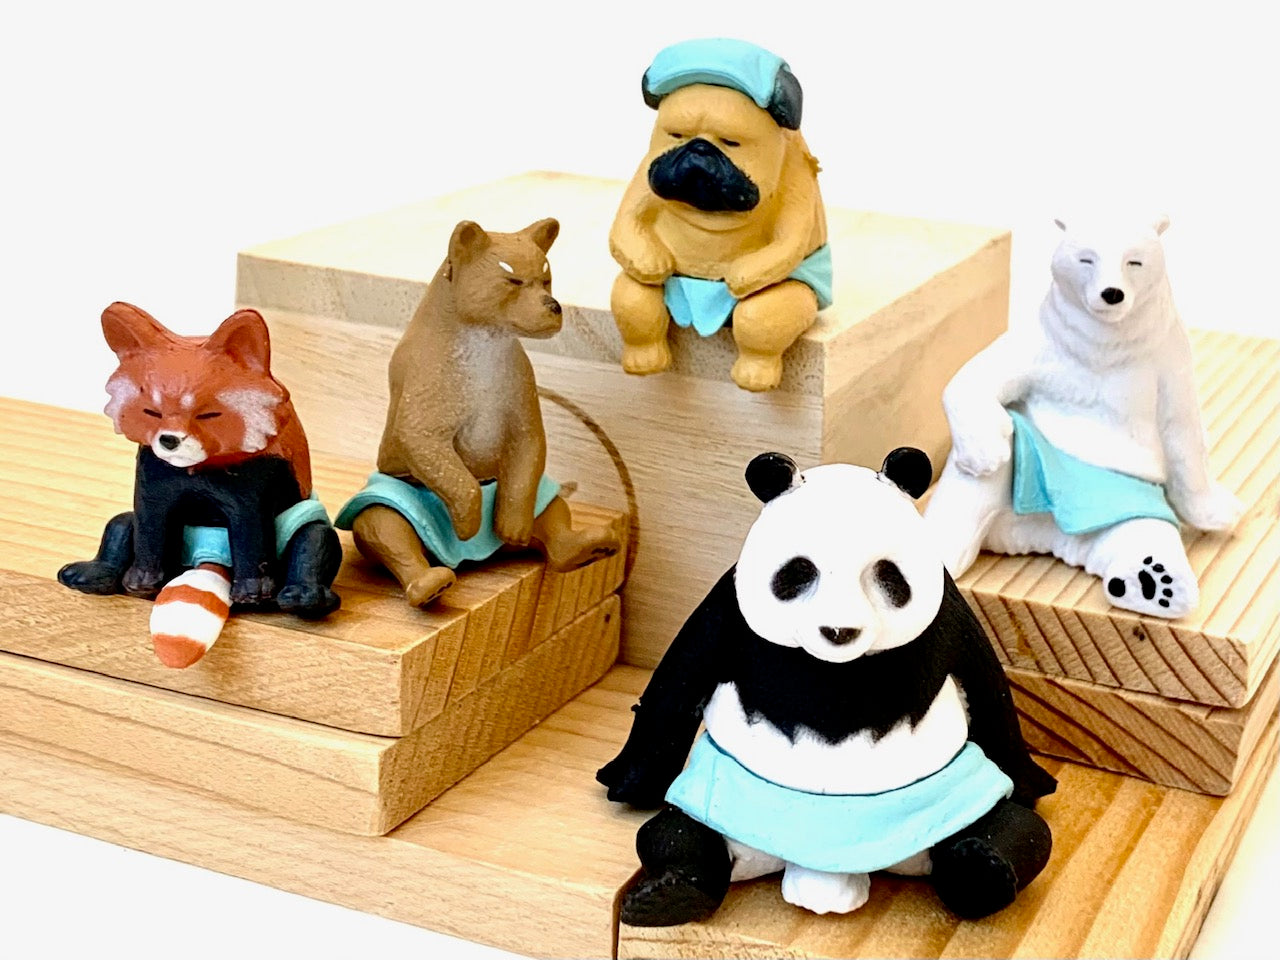 70894 RELAXING SPA ANIMALS FIGURINES-5